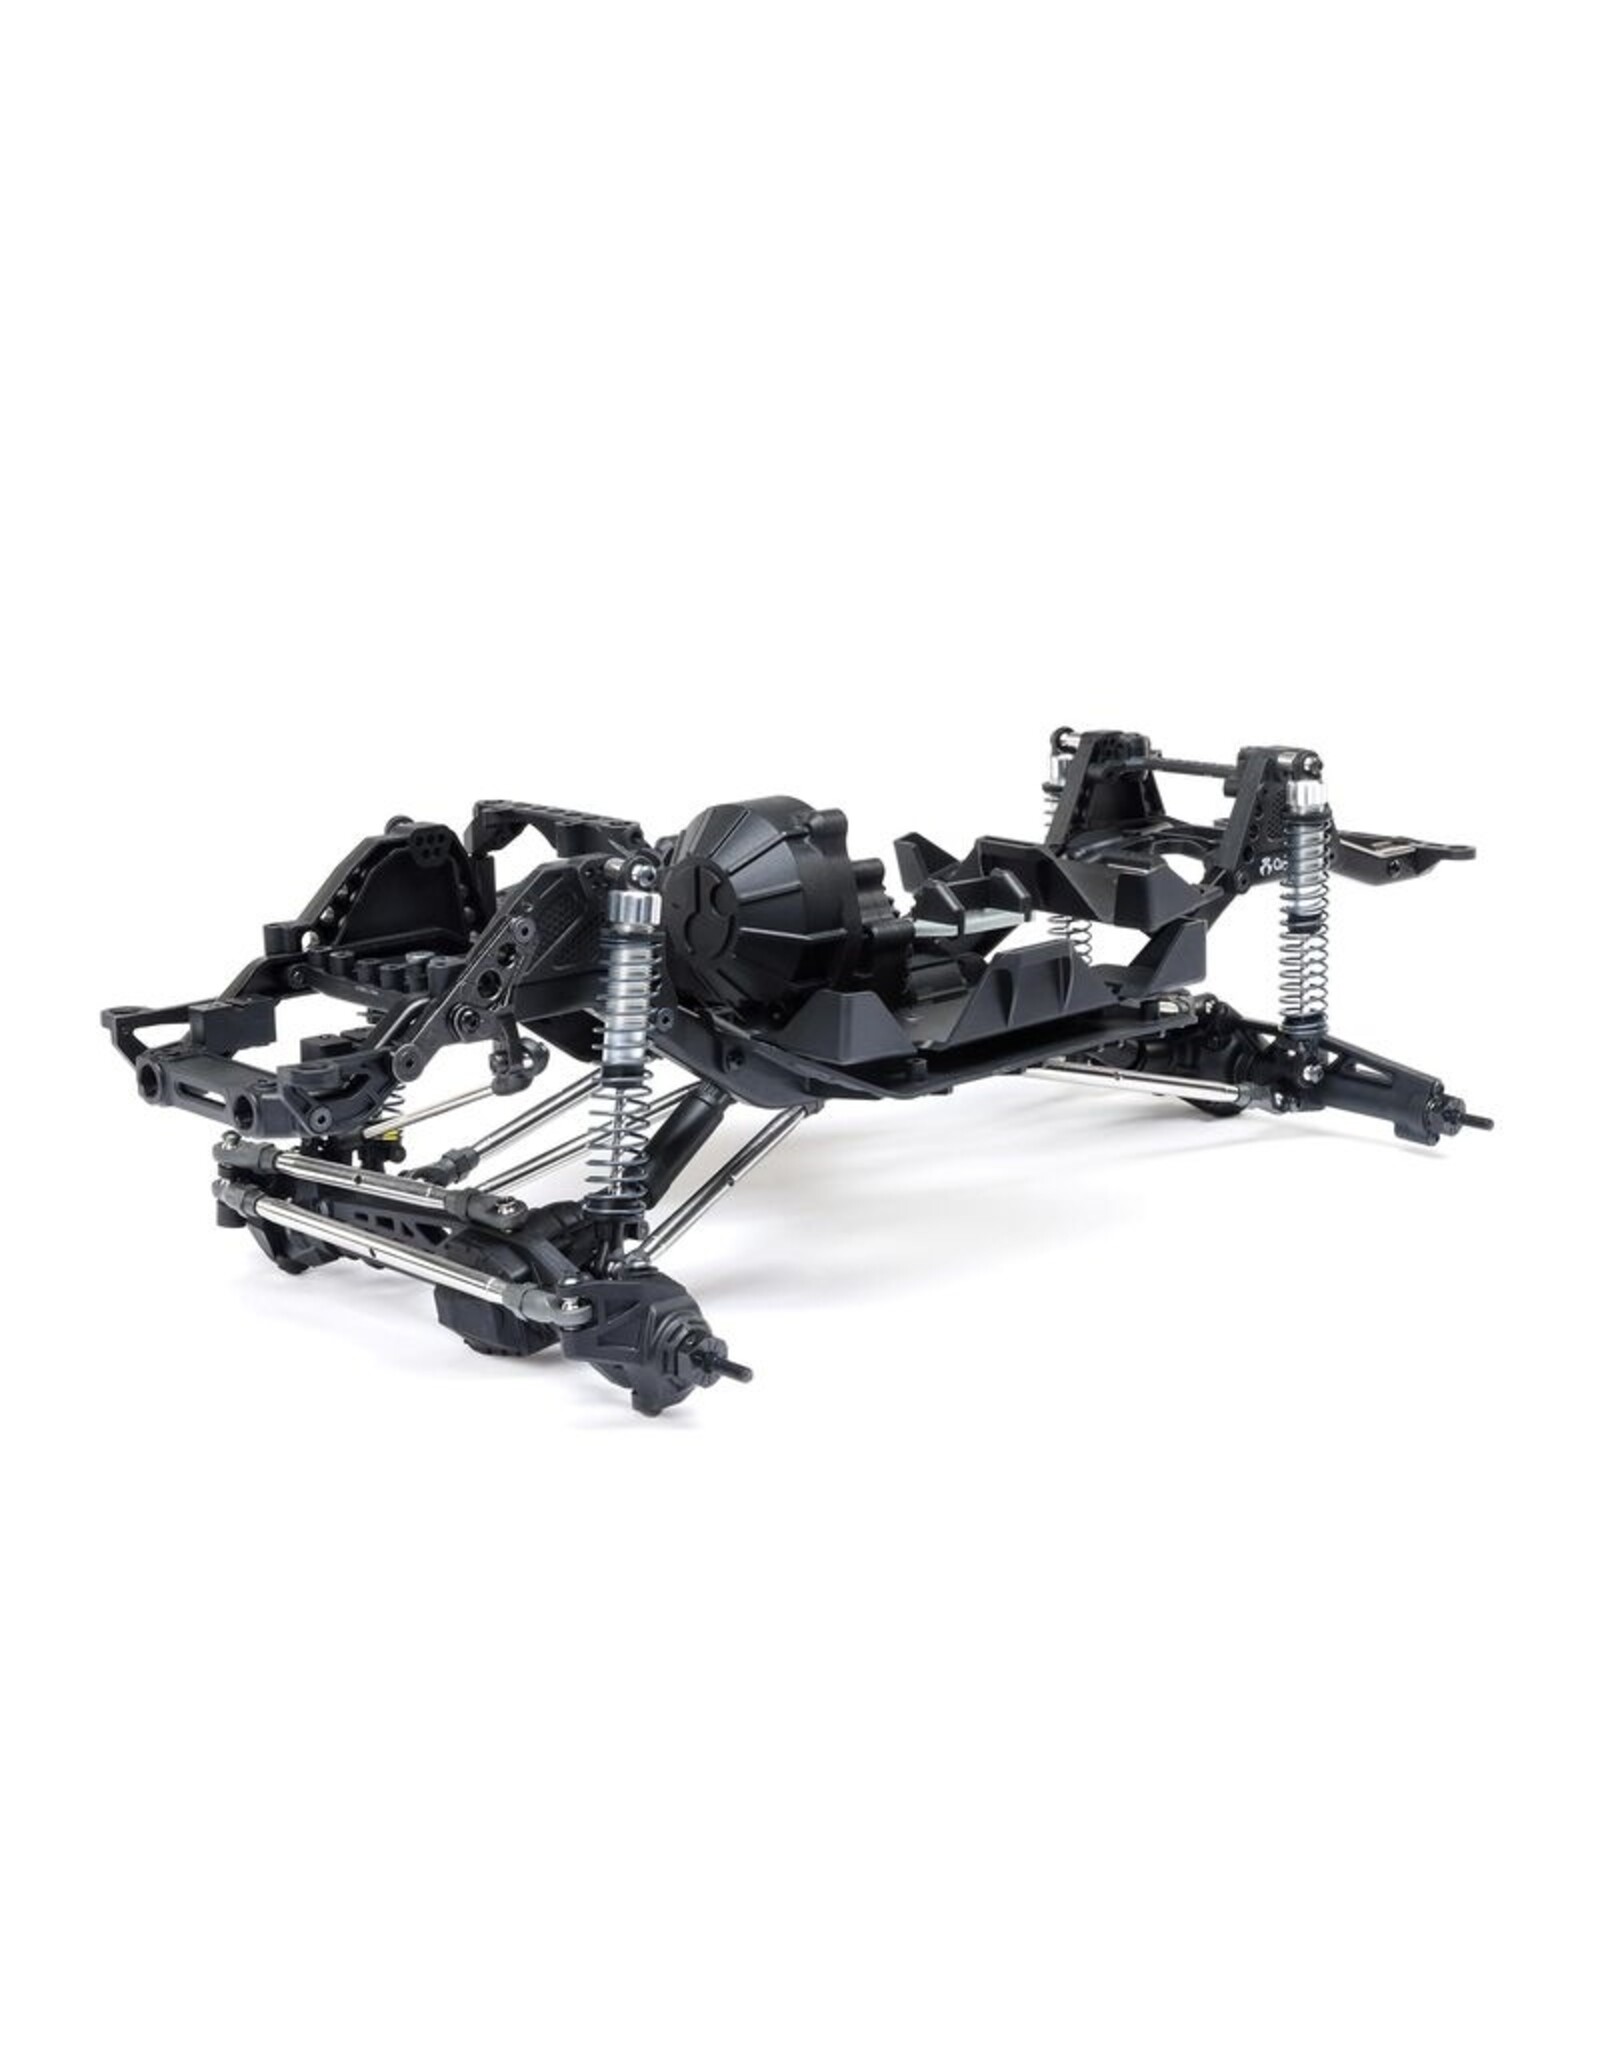 Axial AXI03011 SCX10 III Base Camp Builders Kit 1/10th 4WD